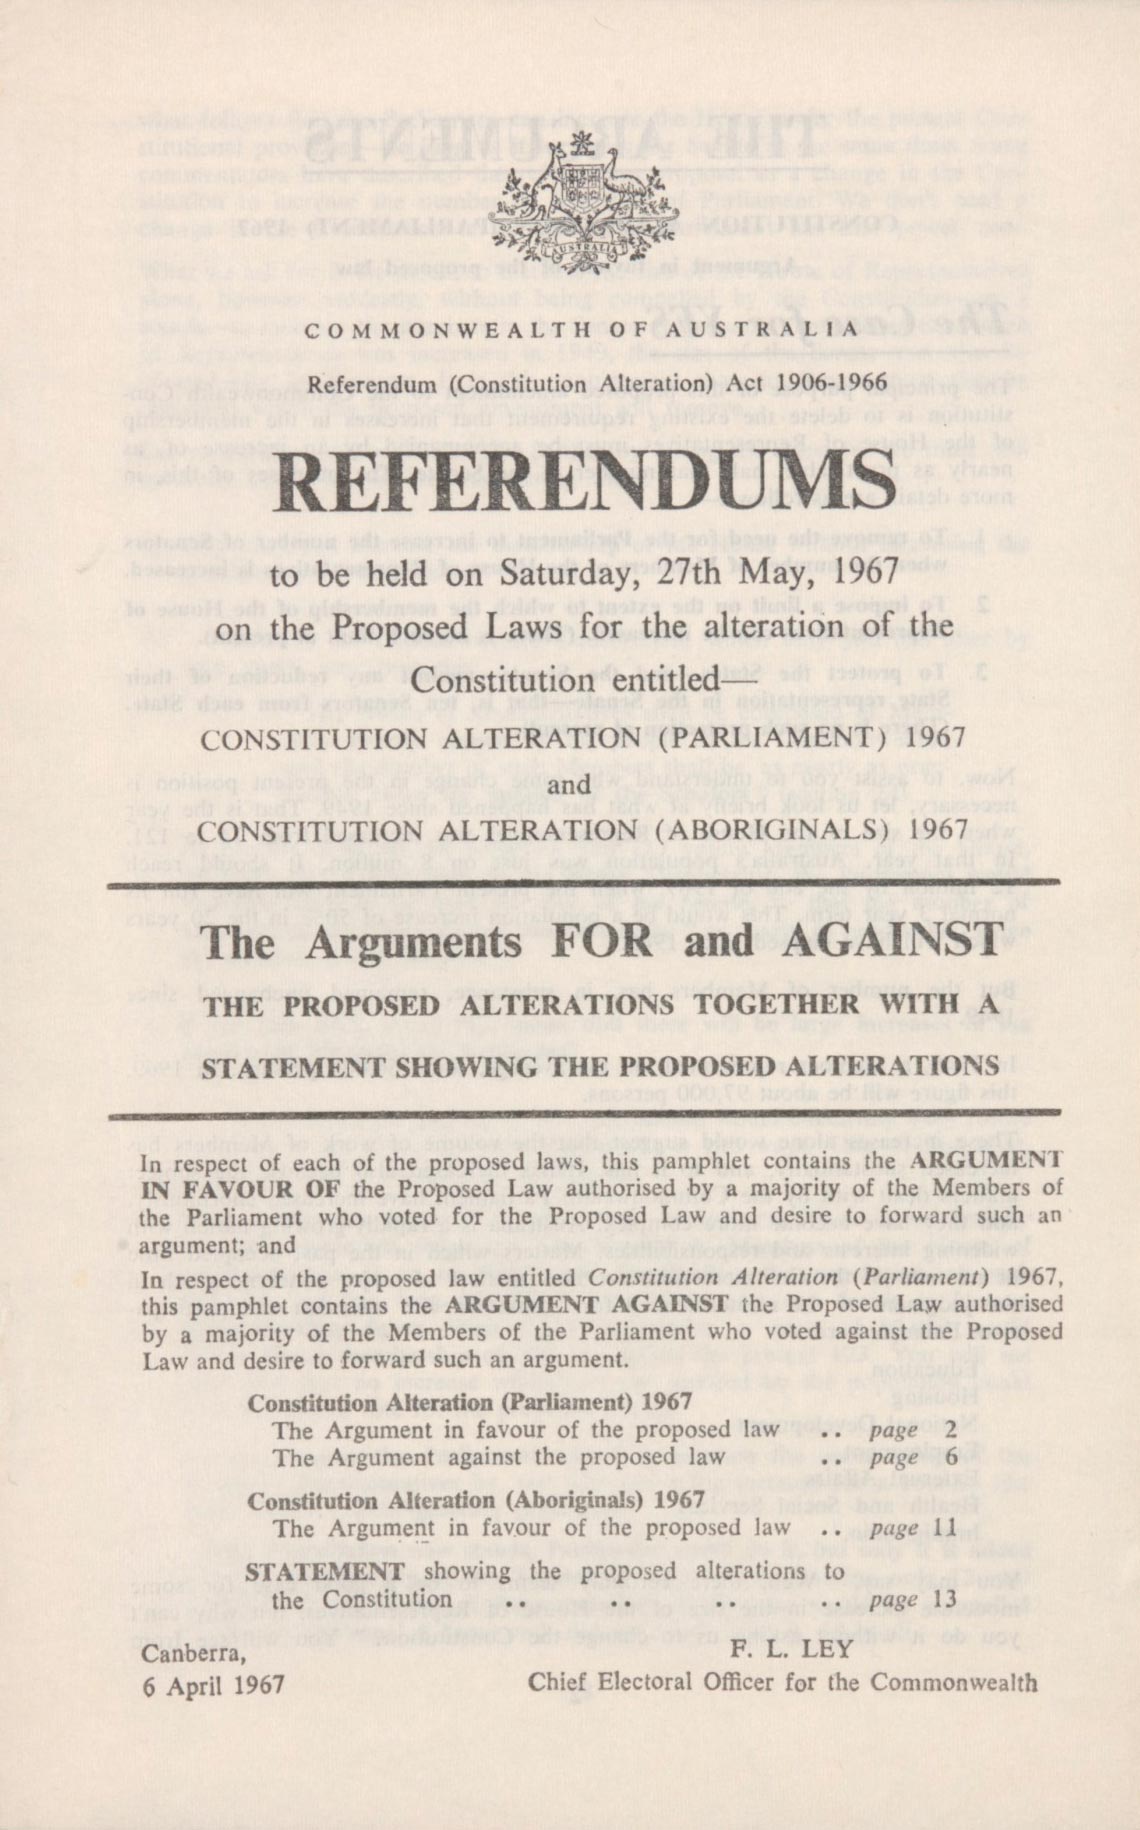 1967 ‘Referendums’ booklet, produced by the Commonwealth of Australia.